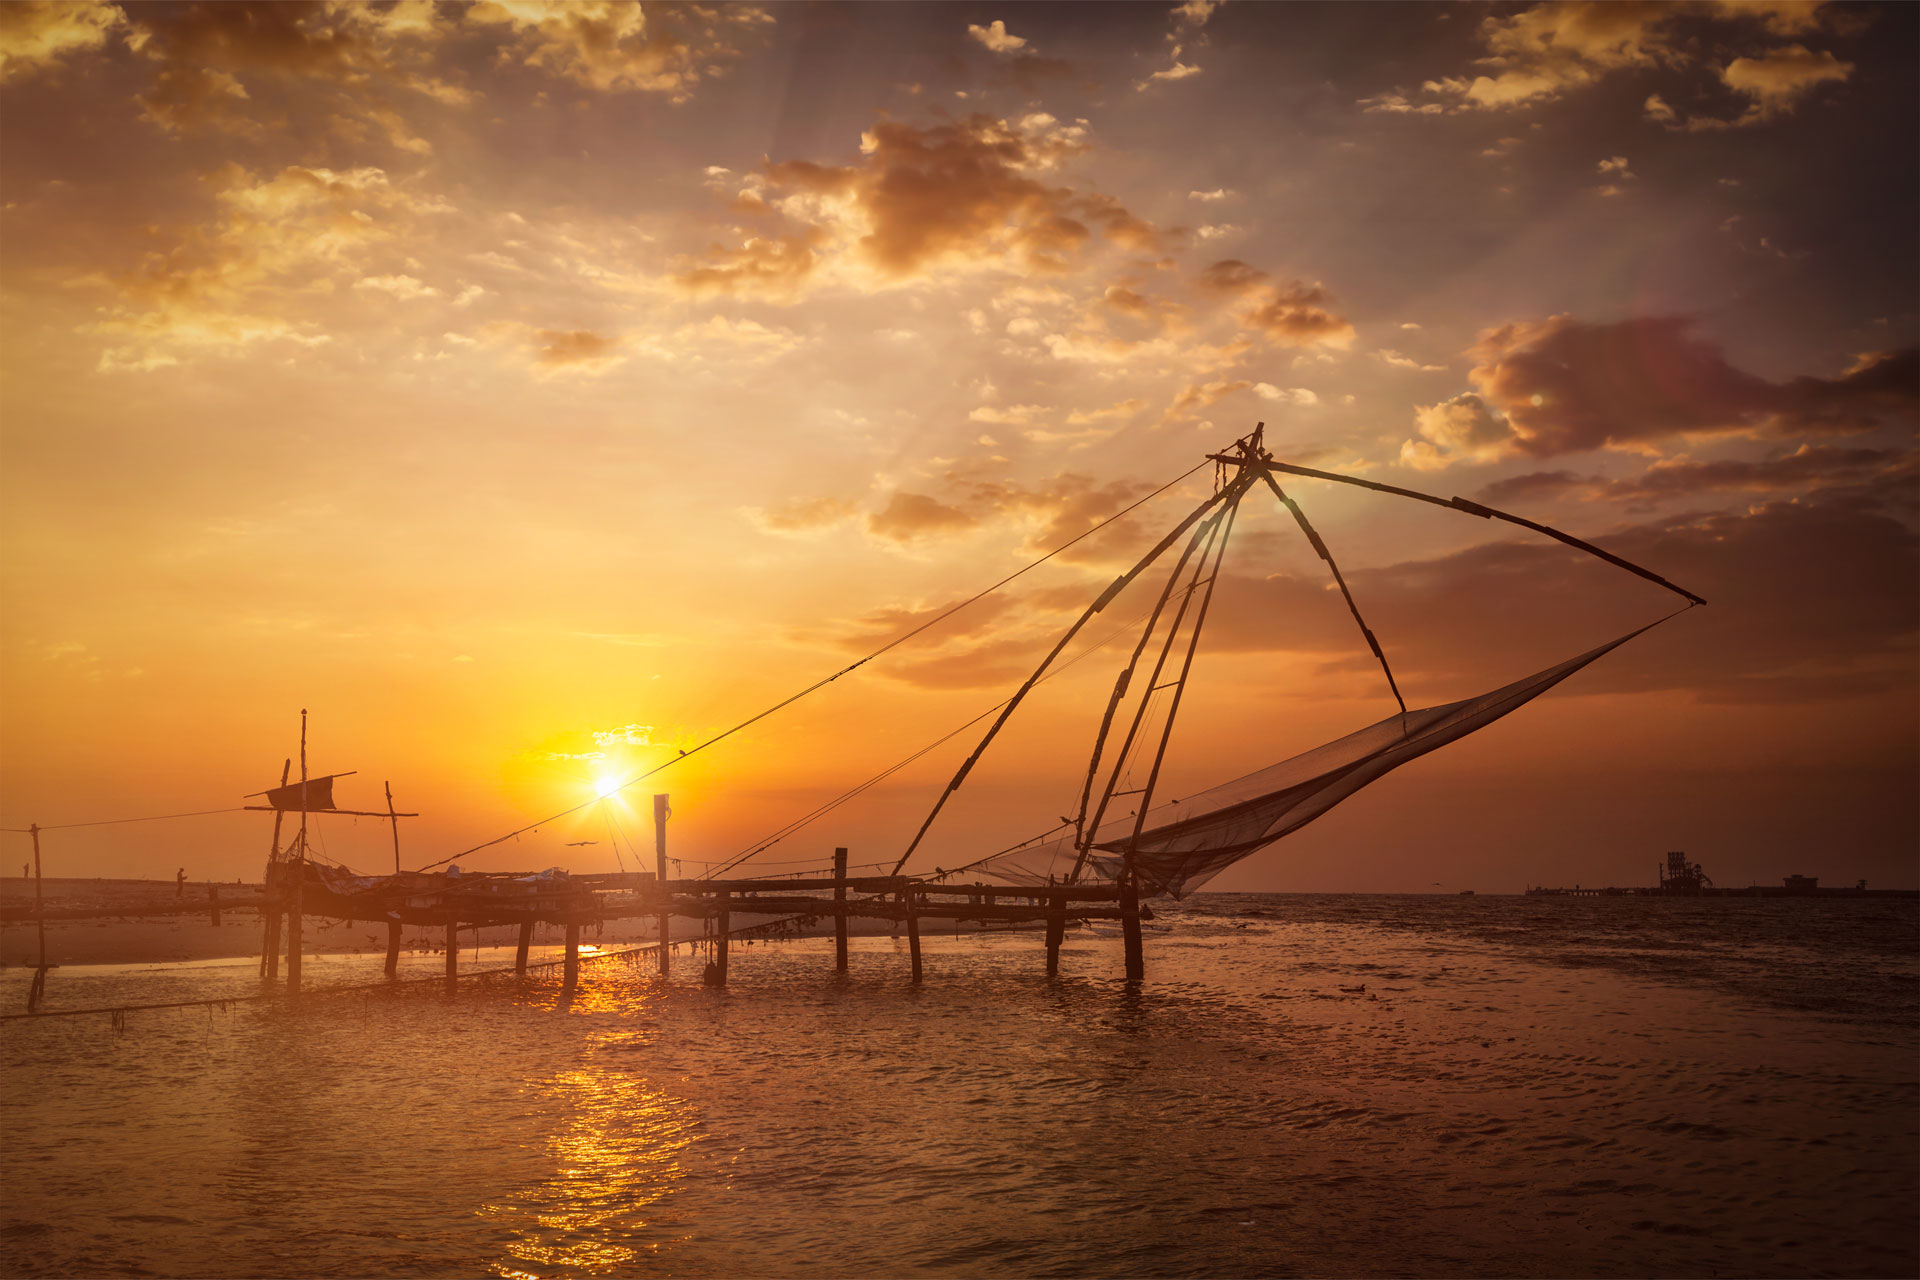 Kochi is the Queen of Arabian Sea, tucked in the beauty of coconut palms and endless blue waters is one of the important towns in south India, with a natural harbour. It is the commercial hub of Kerala.